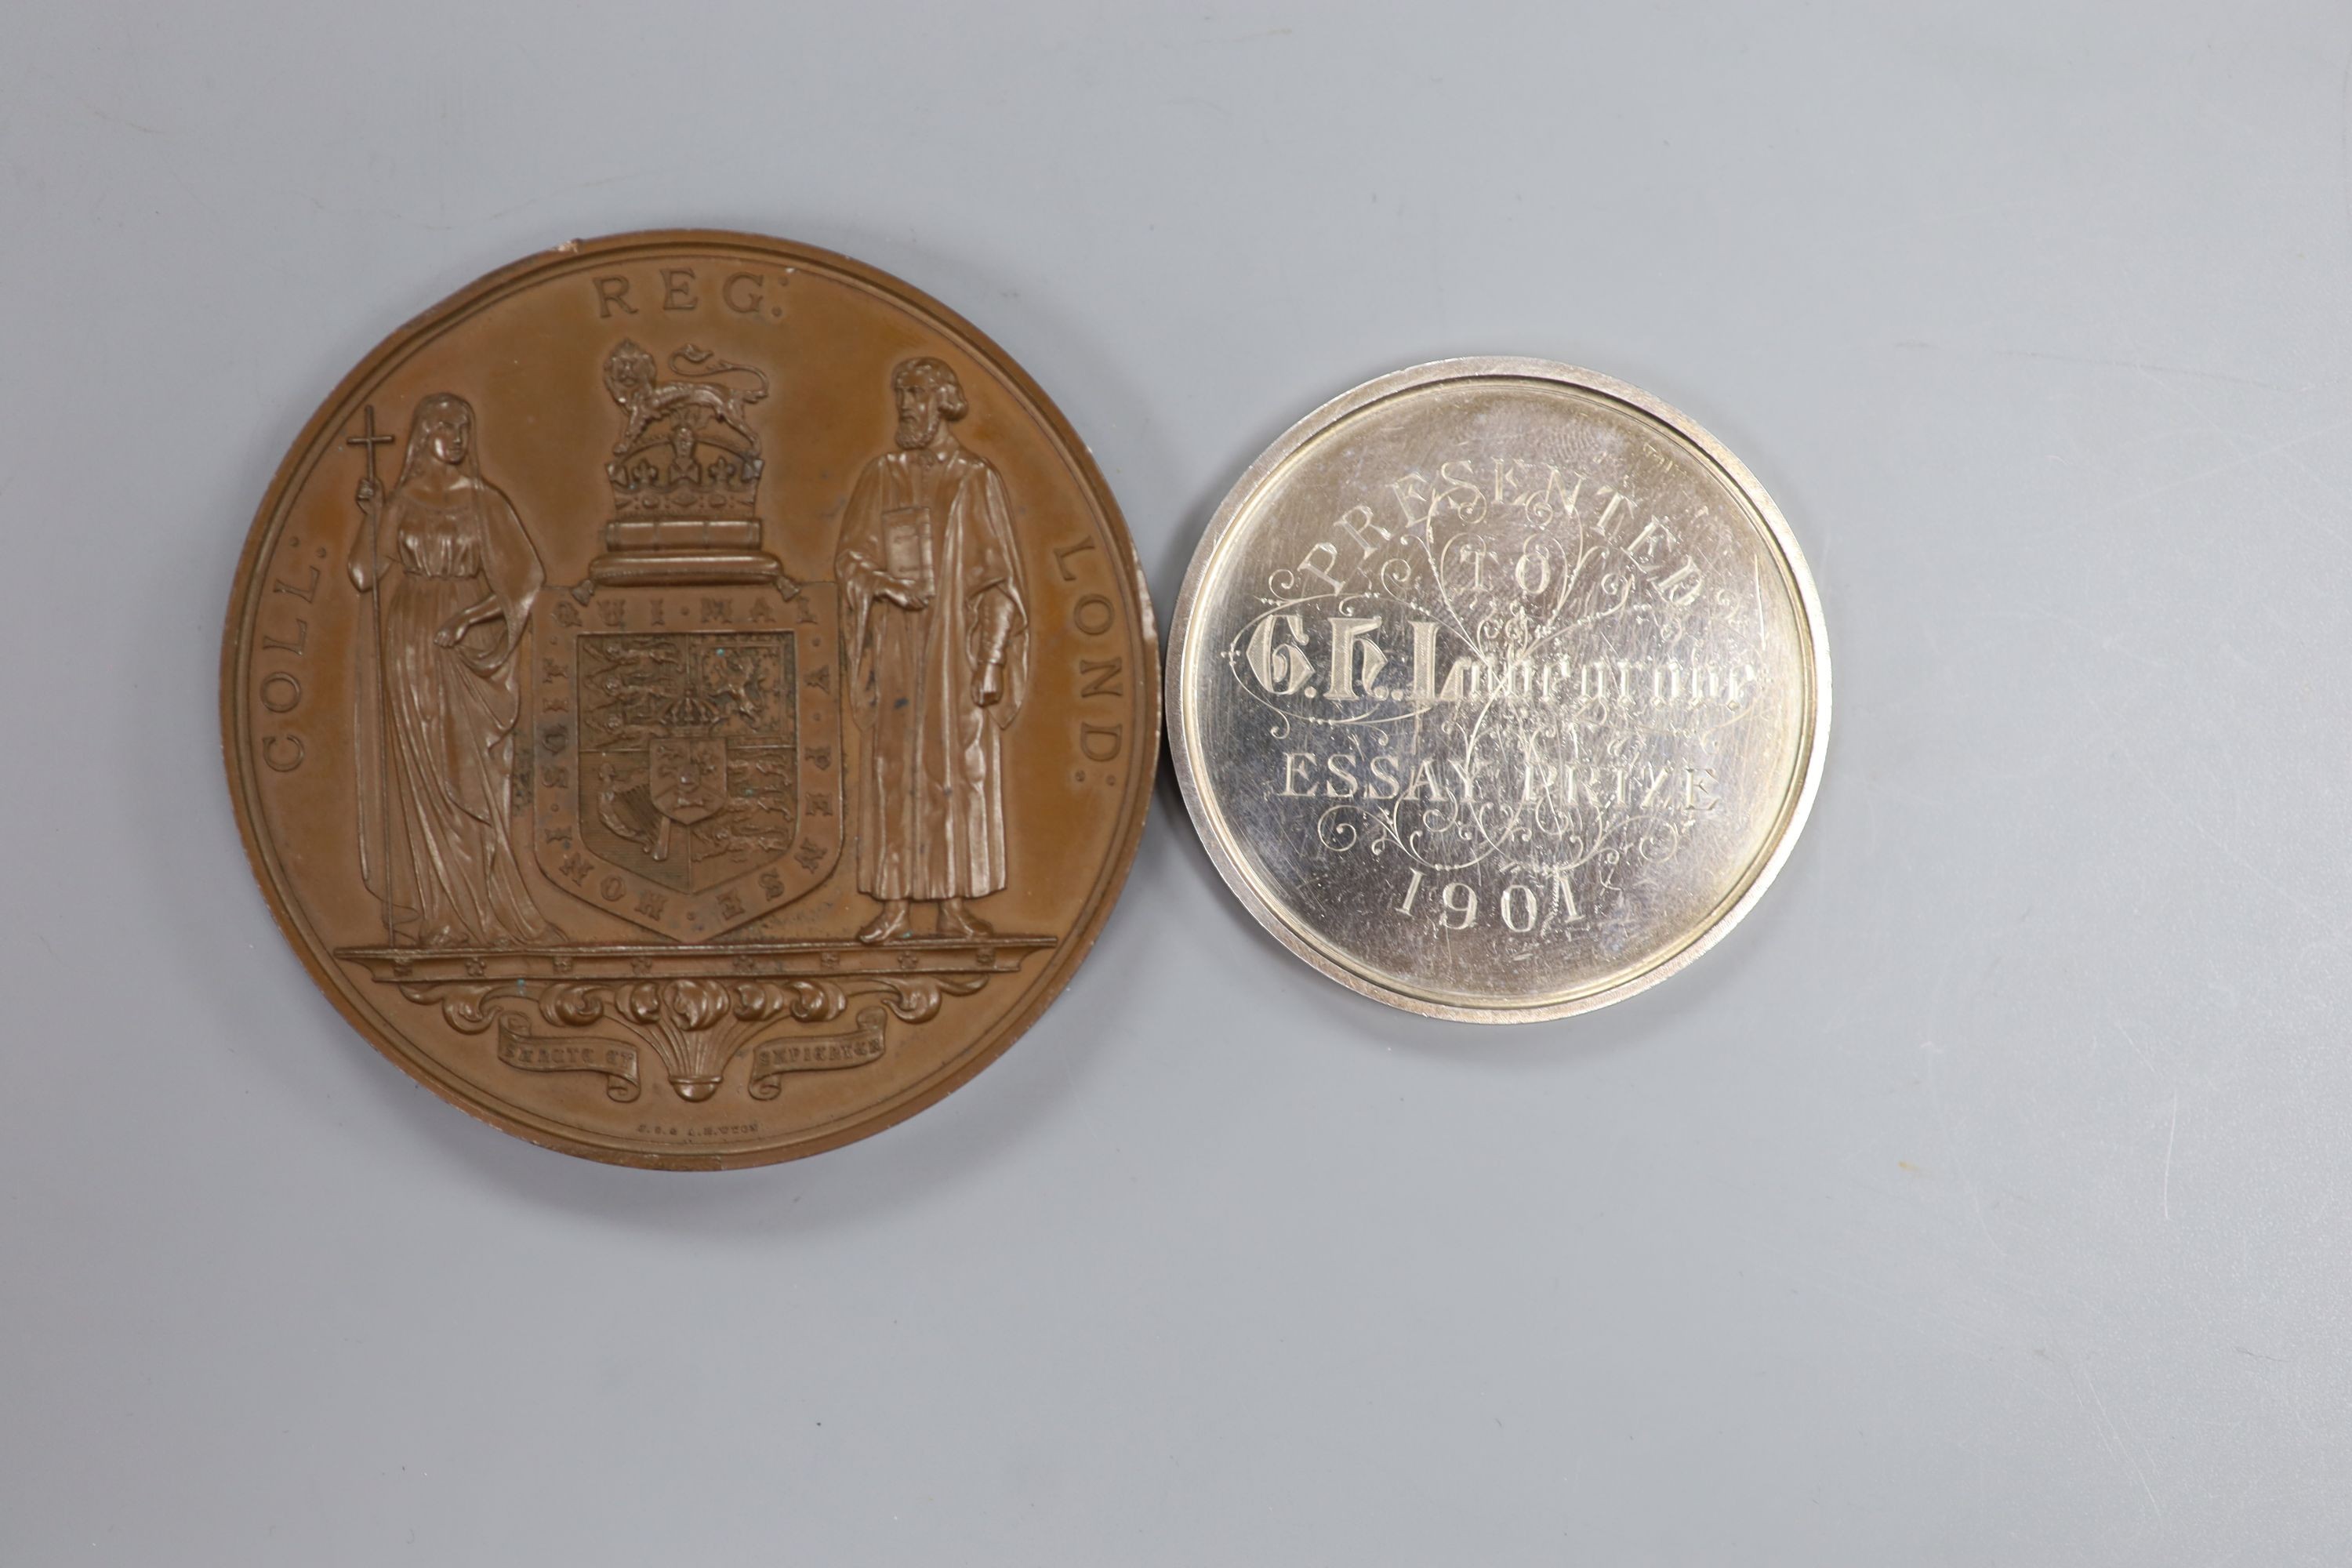 Two early 20th century commemorative medallions